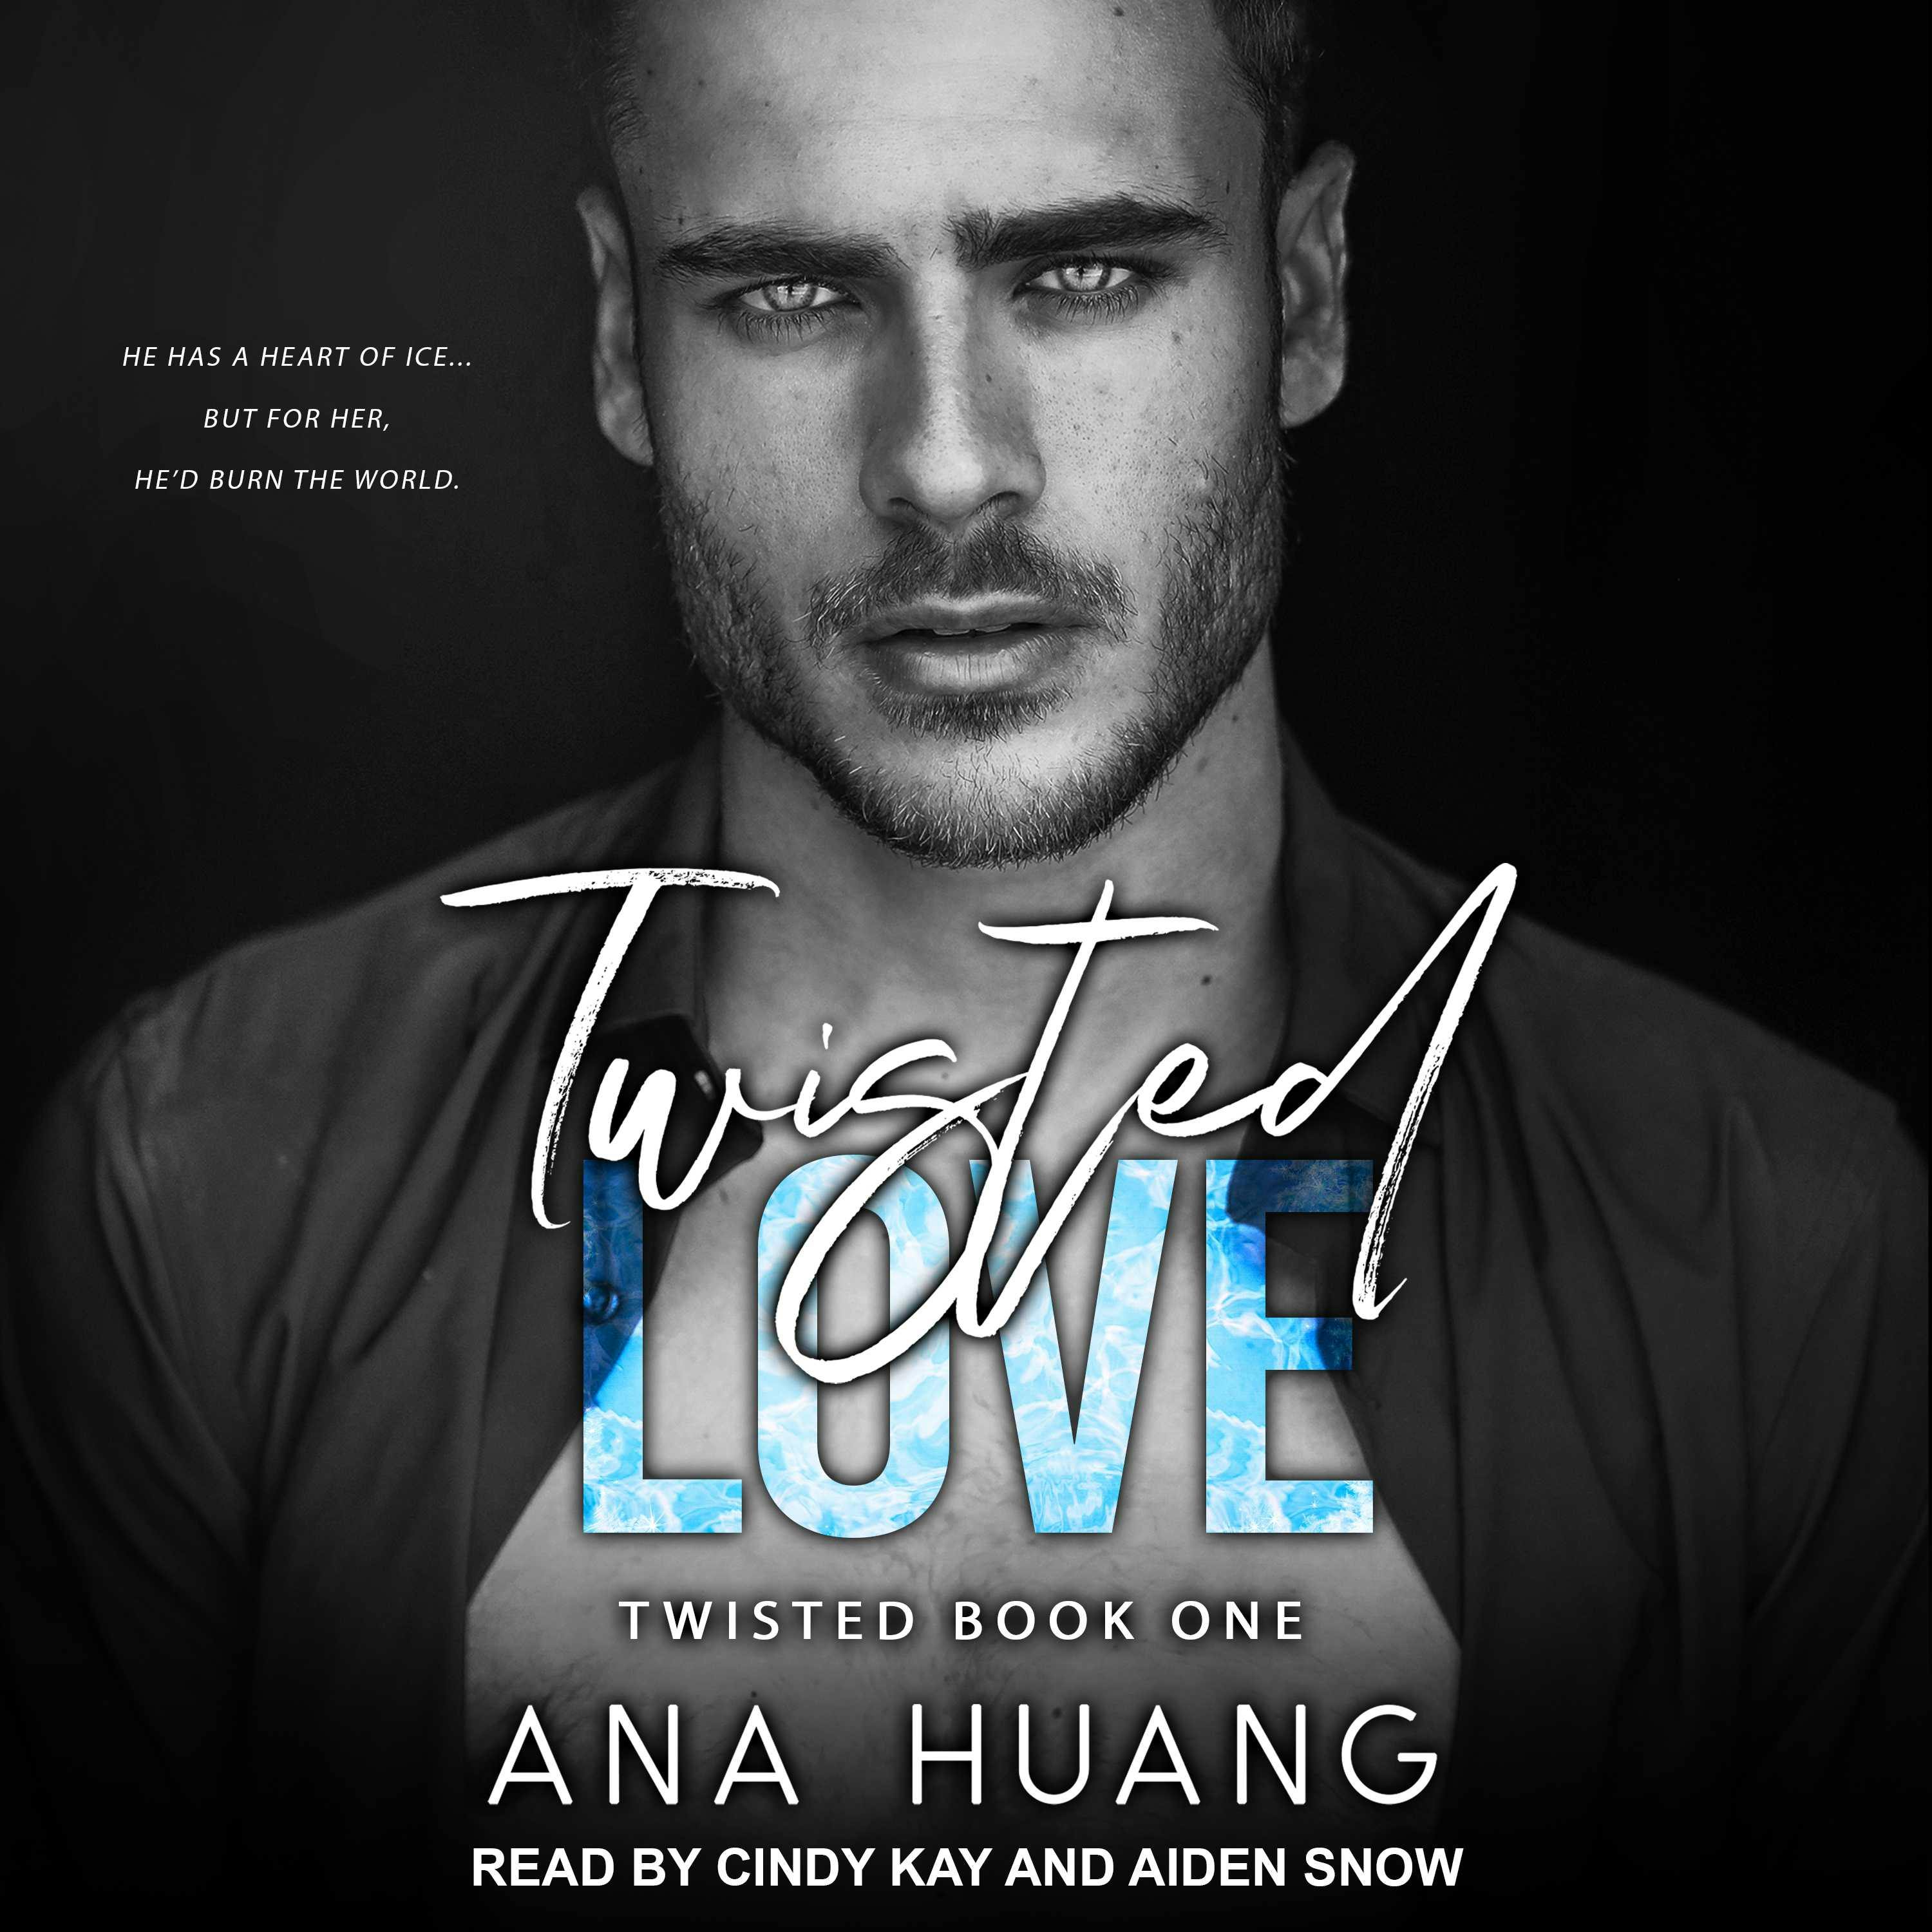 Twisted love by Ana Huang